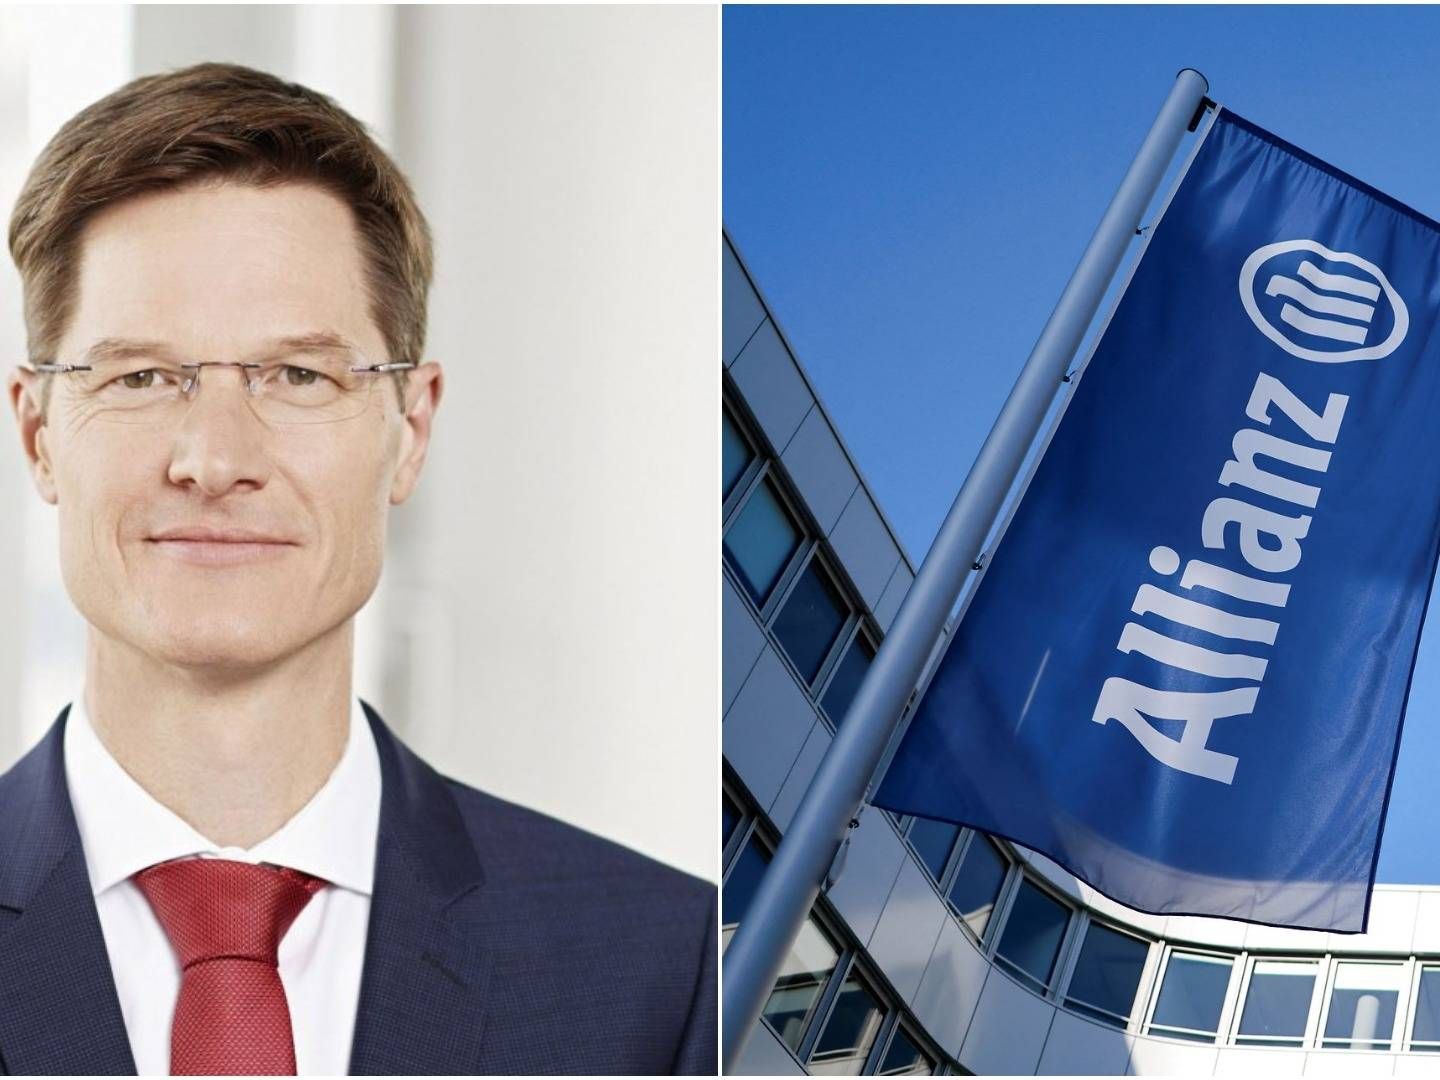 Andreas Wimmer, Allianz's new head of asset management, plans to push further into alternative asset classes. | Photo: https://www.allianz.com/